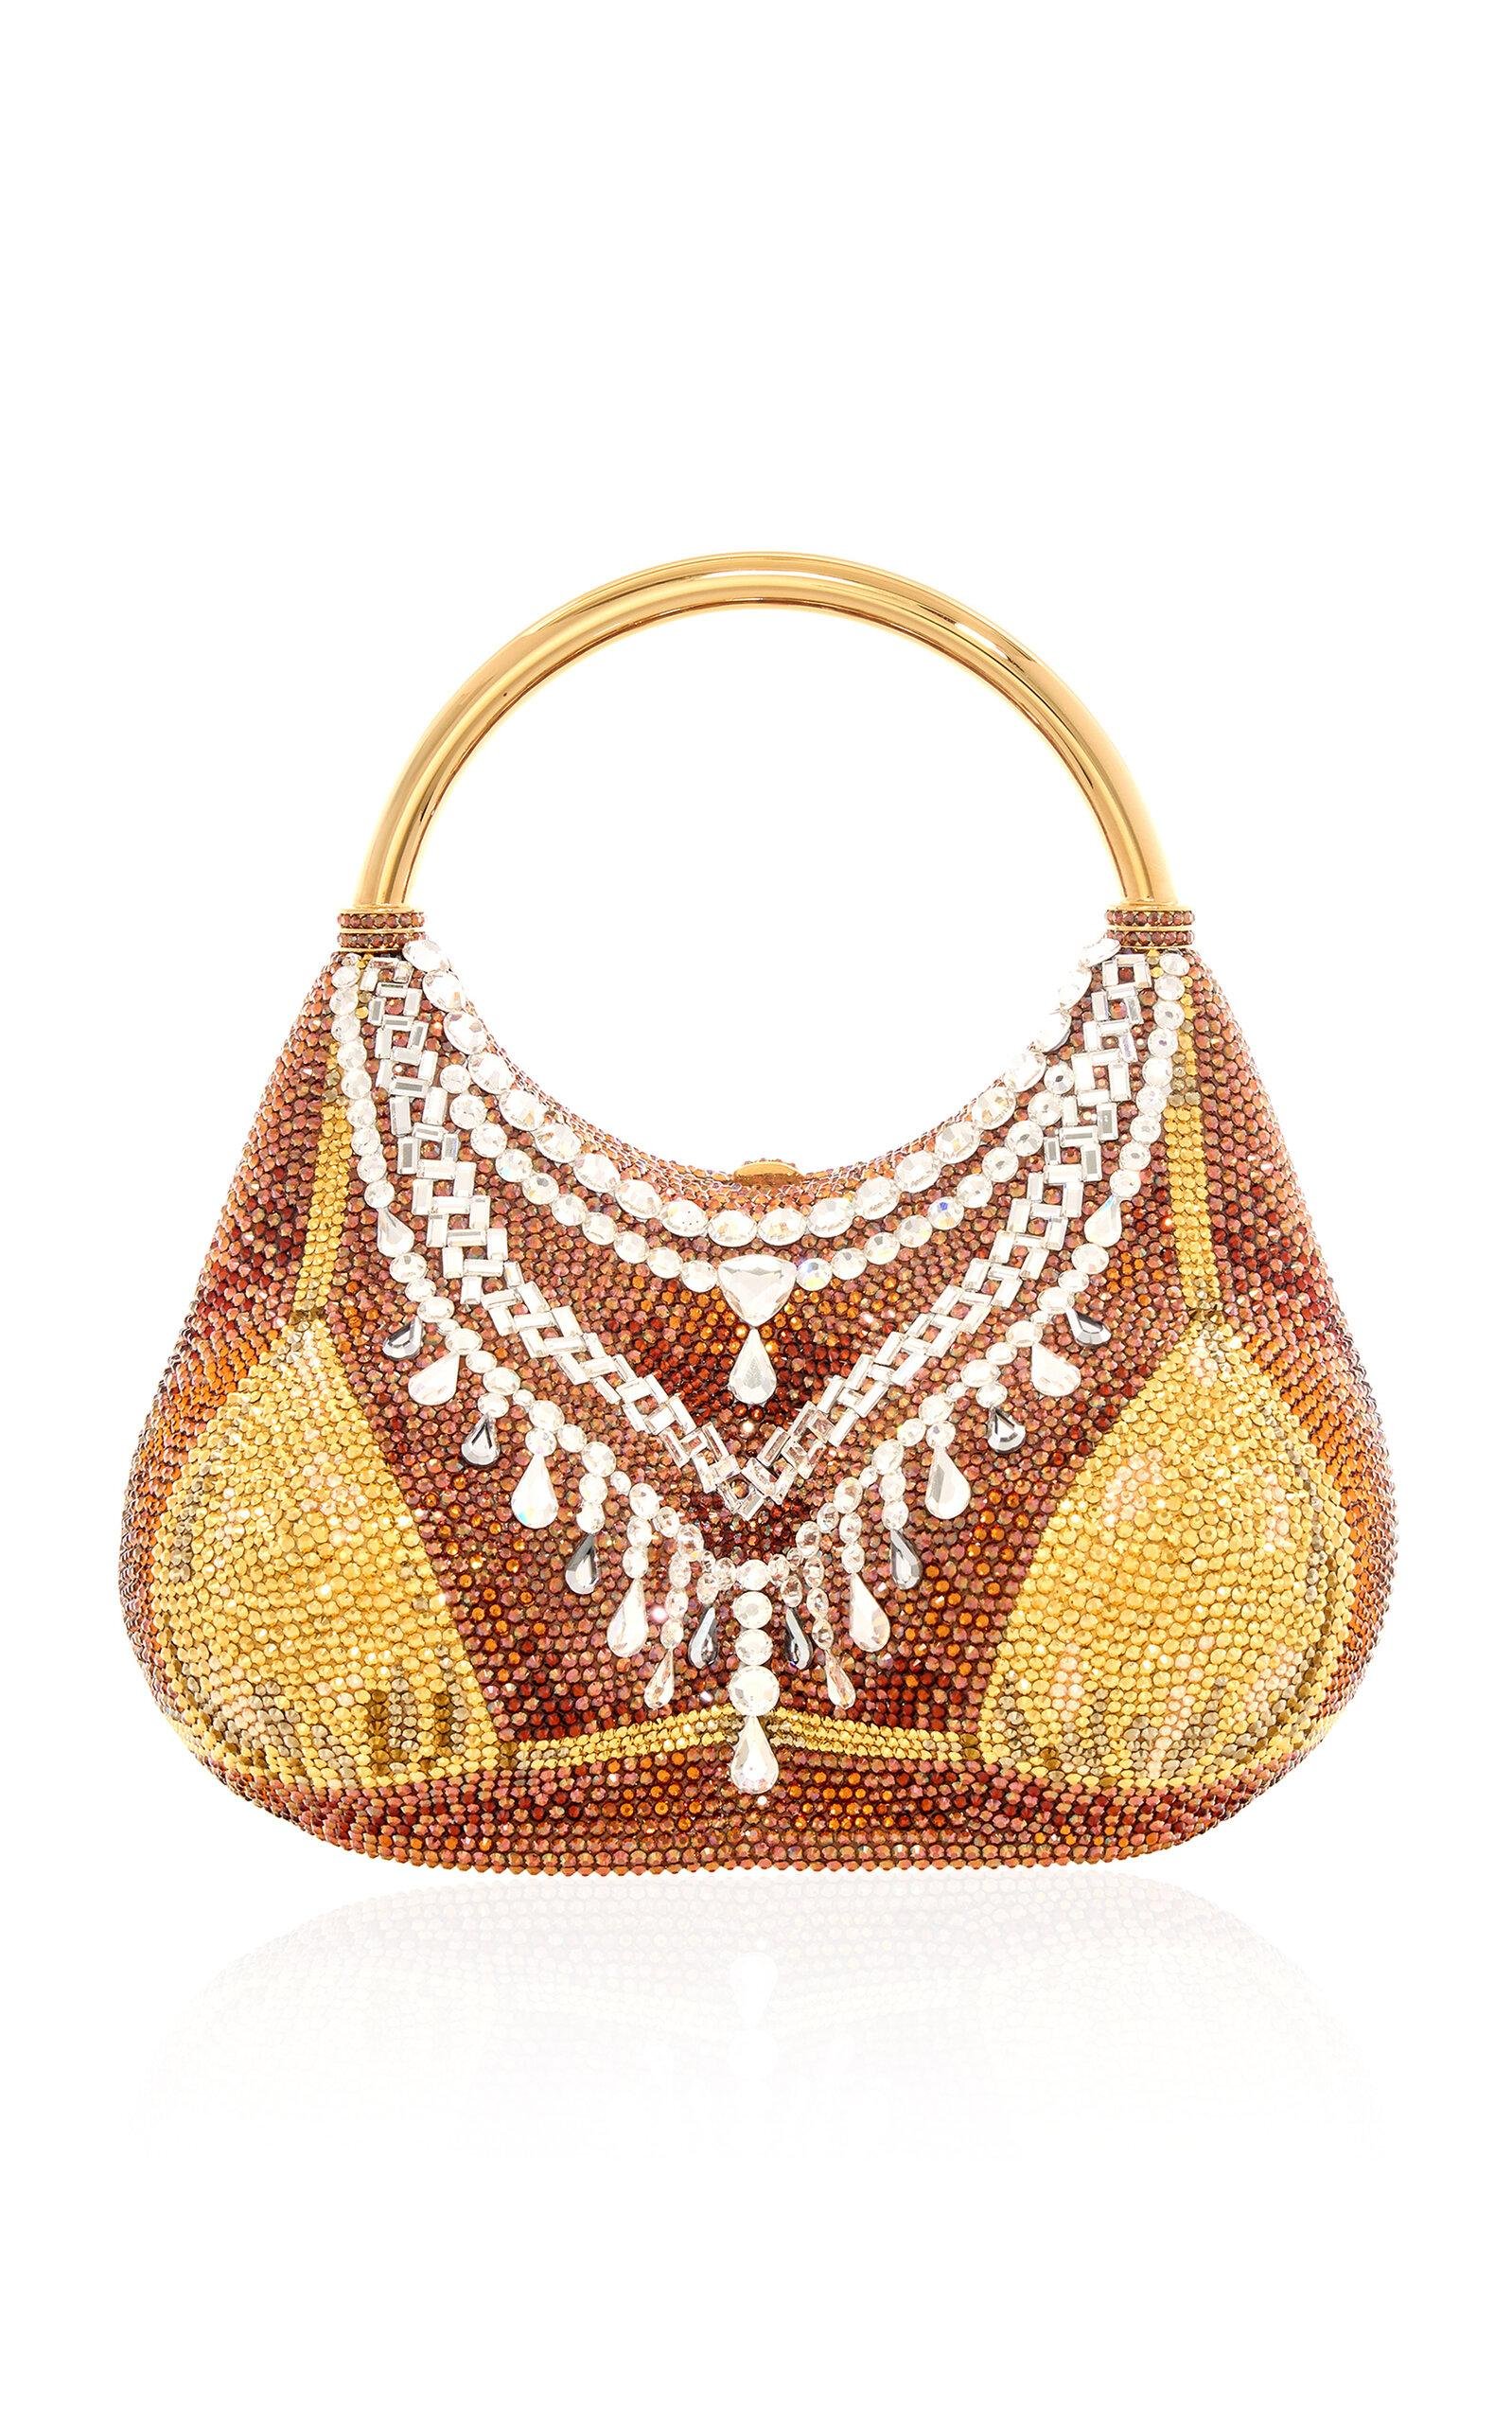 Judith Leiber Couture - Gold Bikini Bust Crystal Clutch - Yellow - OS - Only At Moda Operandi by JUDITH LEIBER COUTURE